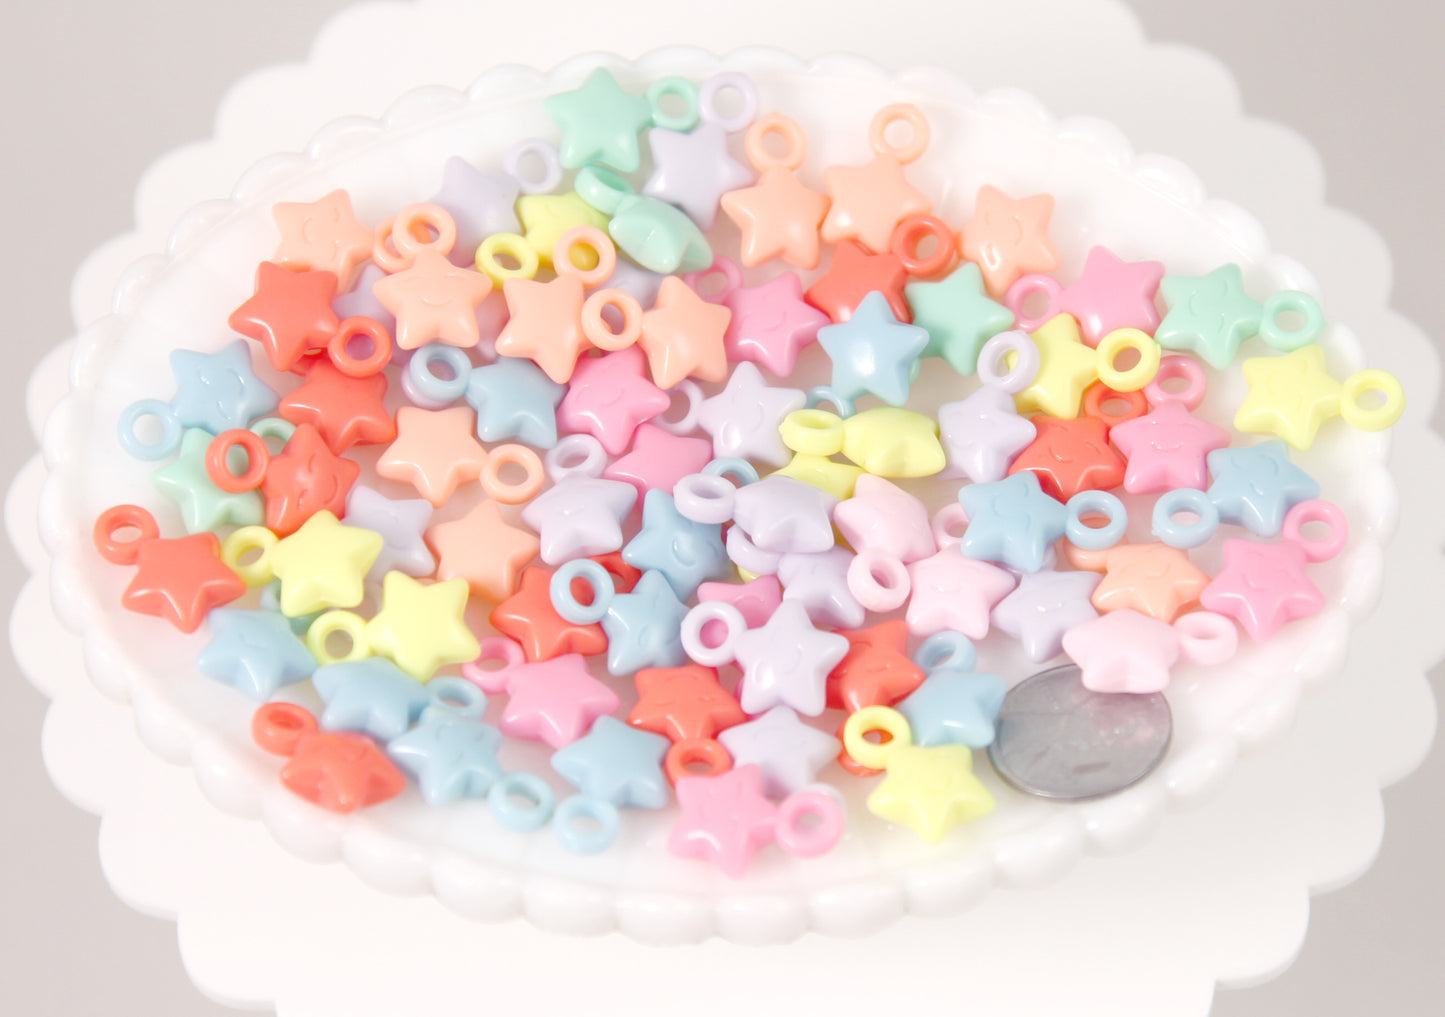 Pastel Star Charms - 18mm Tiny Pastel Star Charms with Faces Plastic or Acrylic Charms or Pendants - 70 pc set